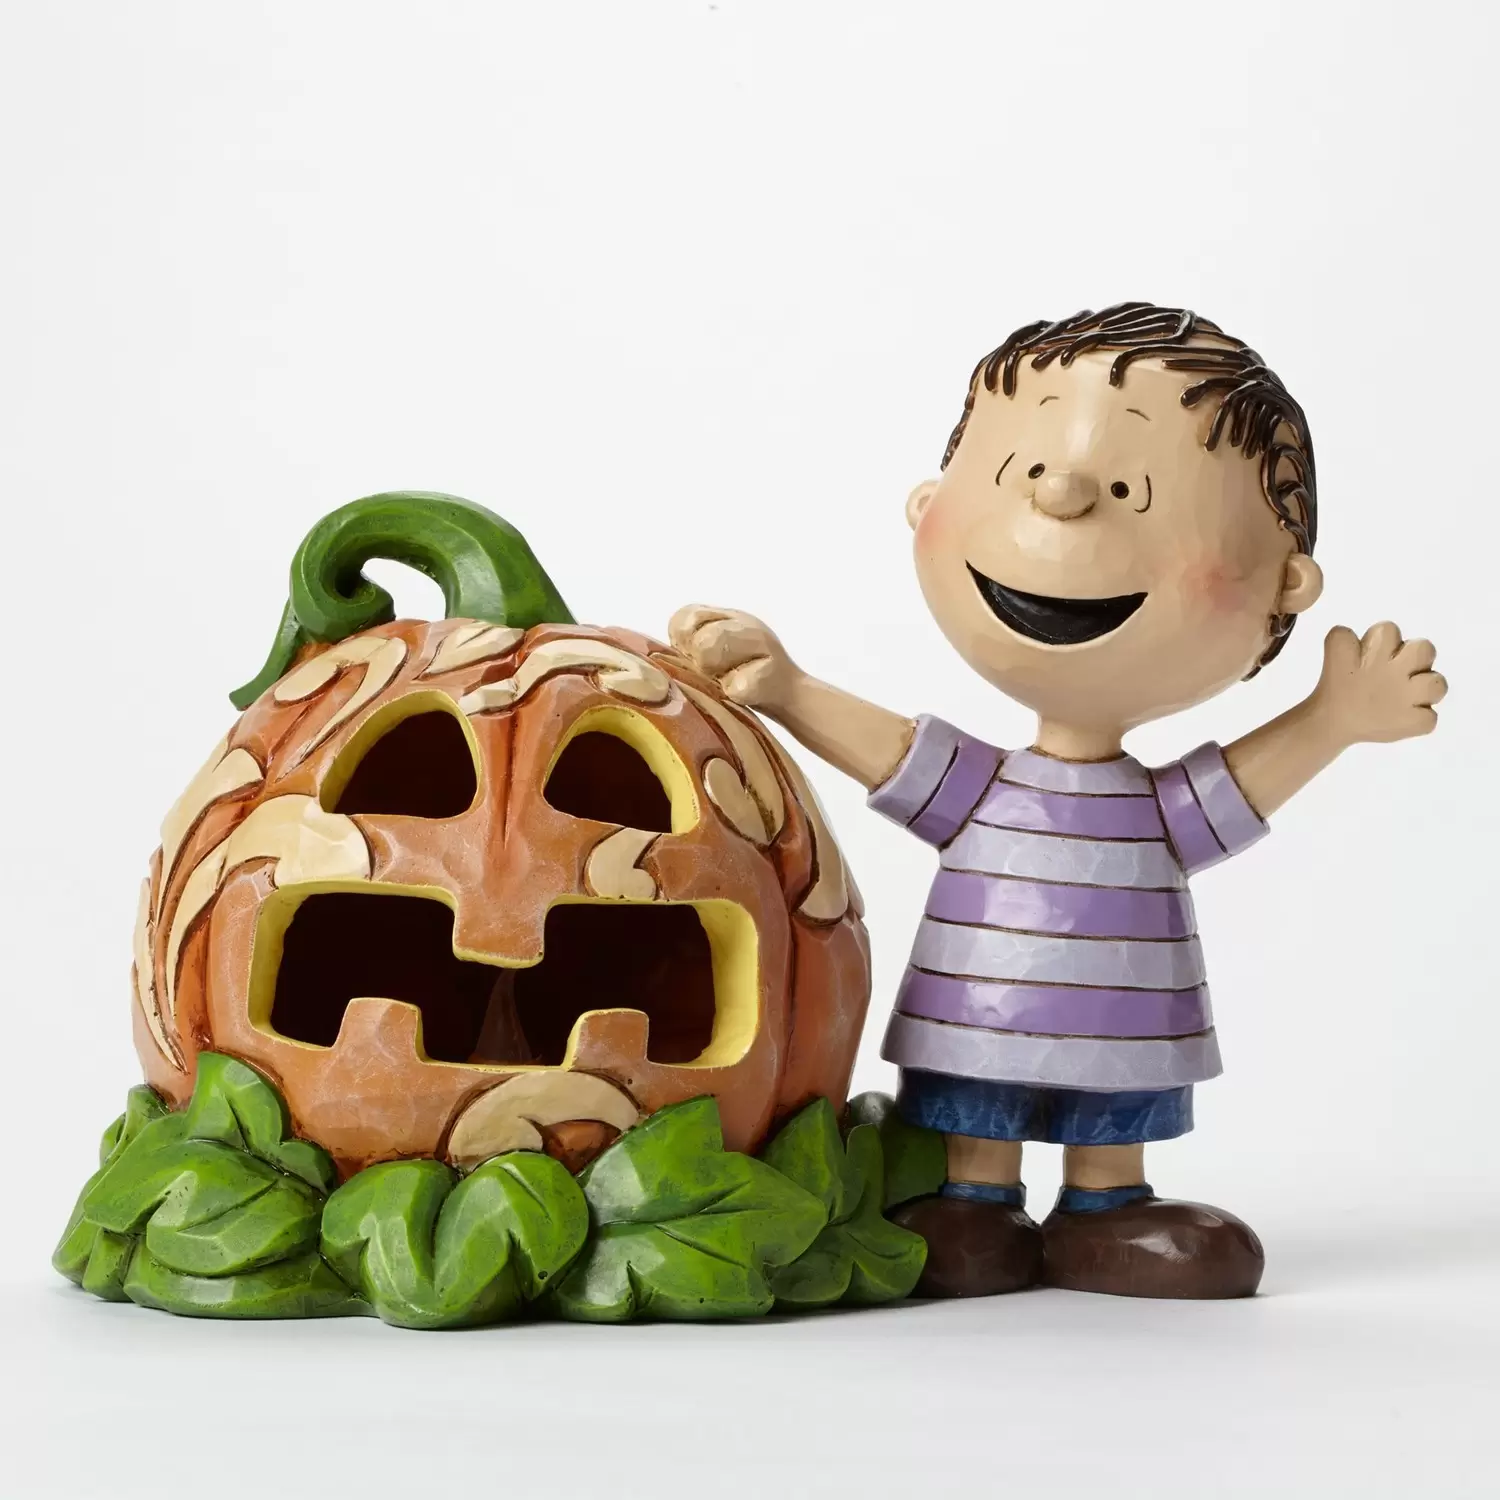 Peanuts - Jim Shore - Waiting for the Great Pumpkin - Linus and the Great Pumpkin Light Up